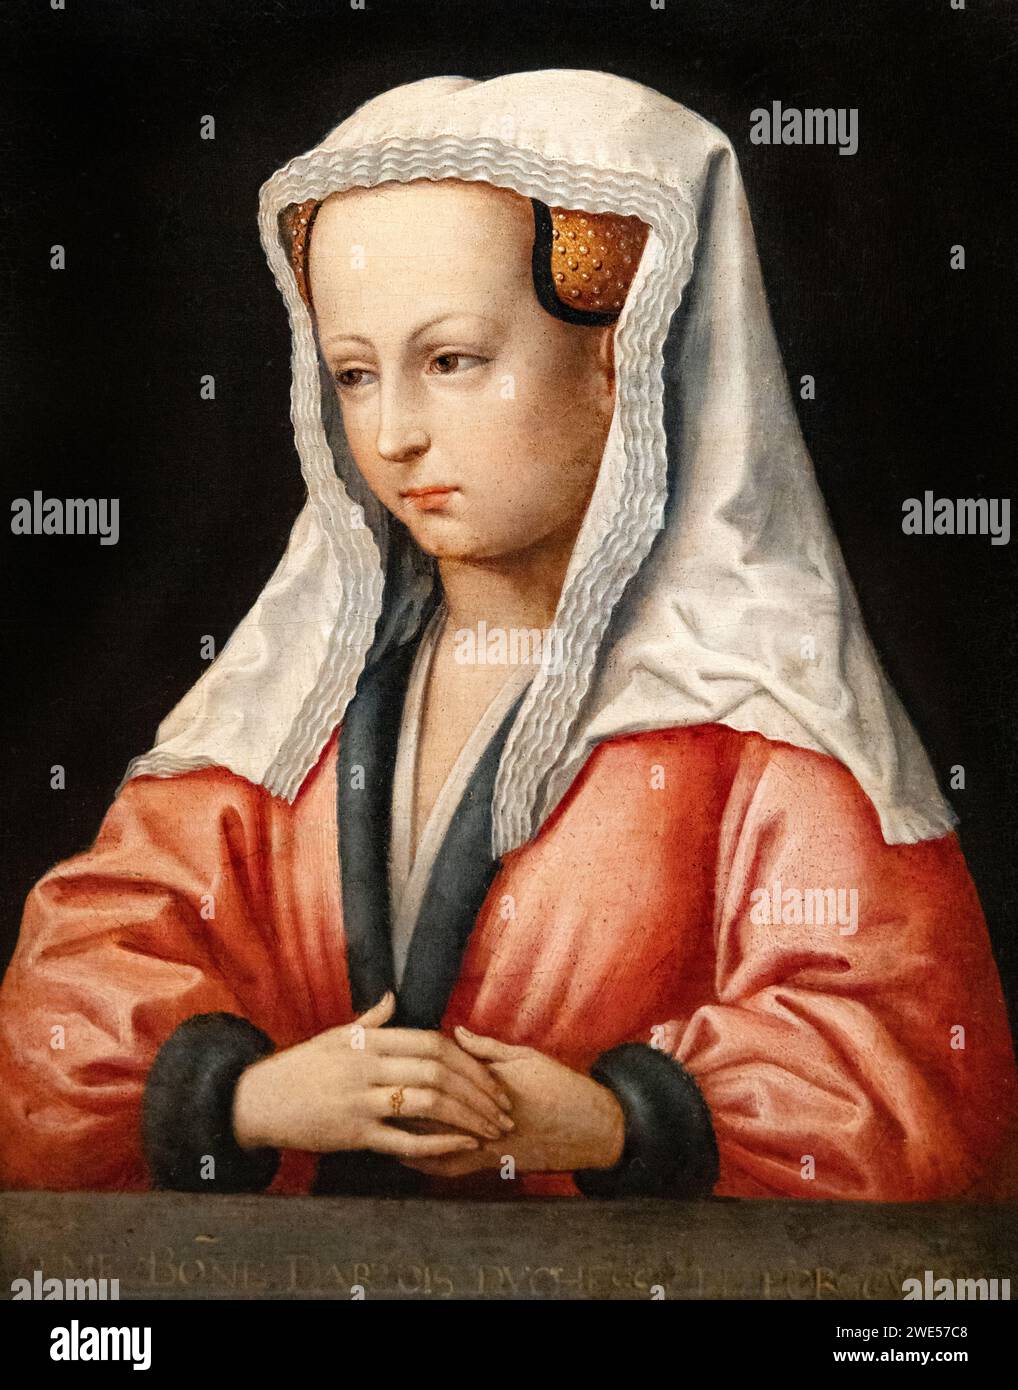 Copy after Jan van Eyck painting; A portrait of Bonne d'Artois (1396-1425); painted in the 16th century from motifs from Van Eycks works. Stock Photo